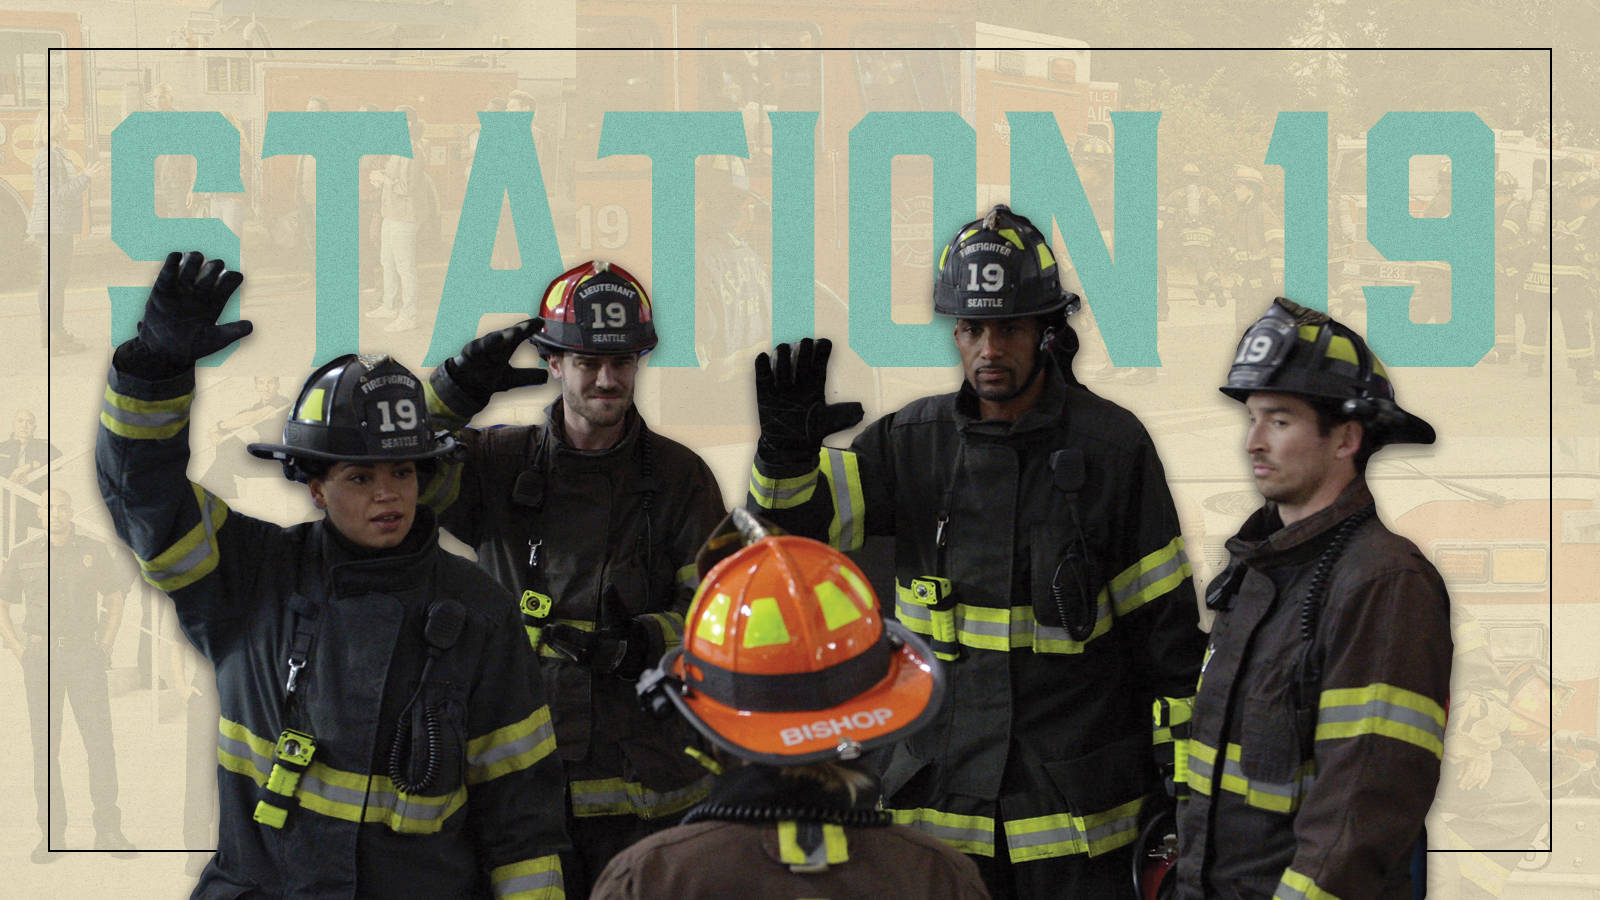 Station 19 Epic Members Background